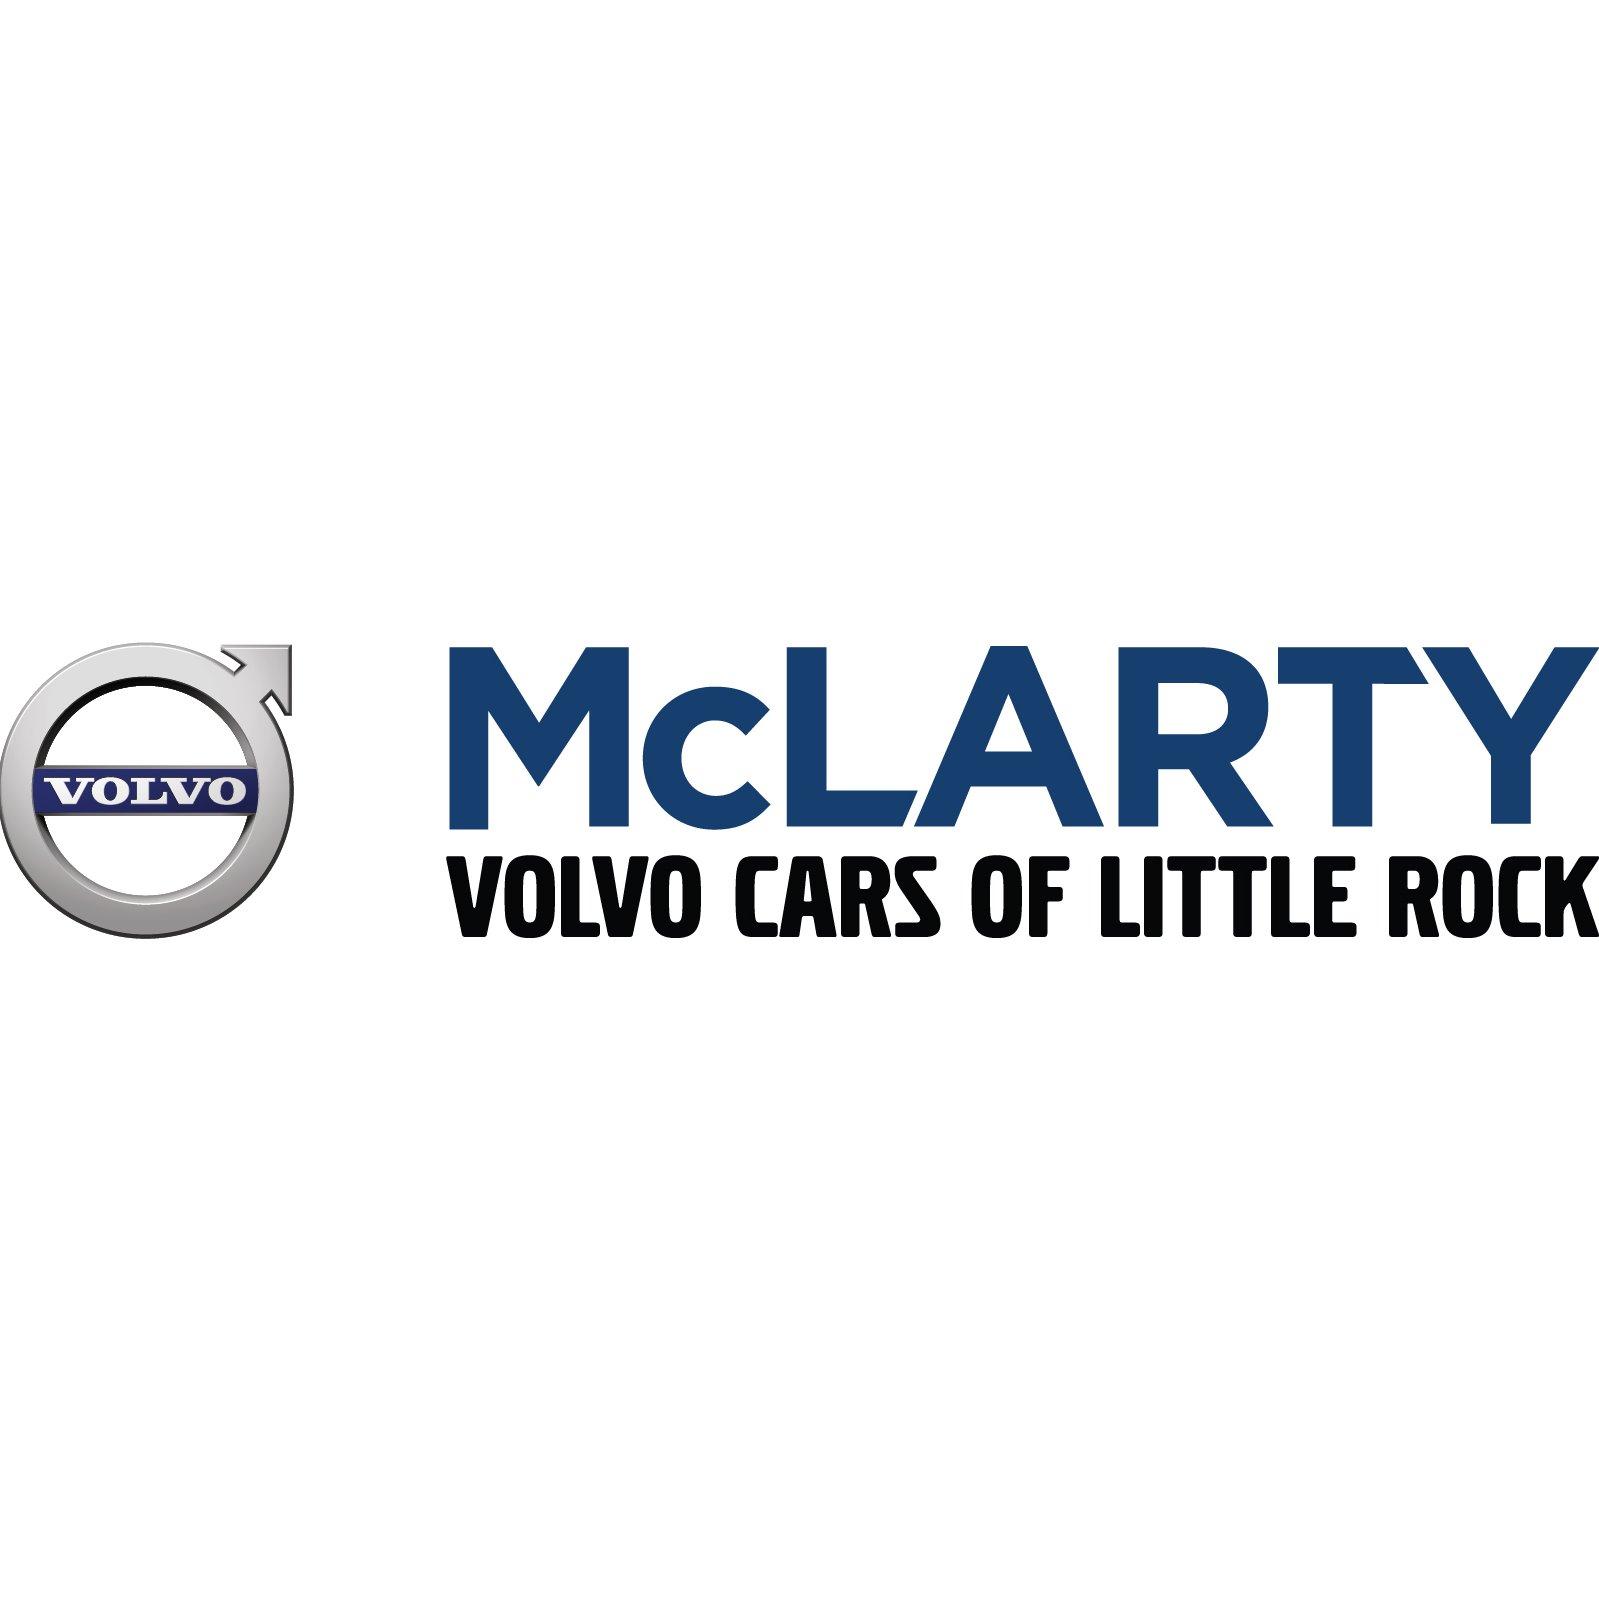 McLarty Volvo Cars of Little Rock - Little Rock, AR 72211 - (501)907-0200 | ShowMeLocal.com